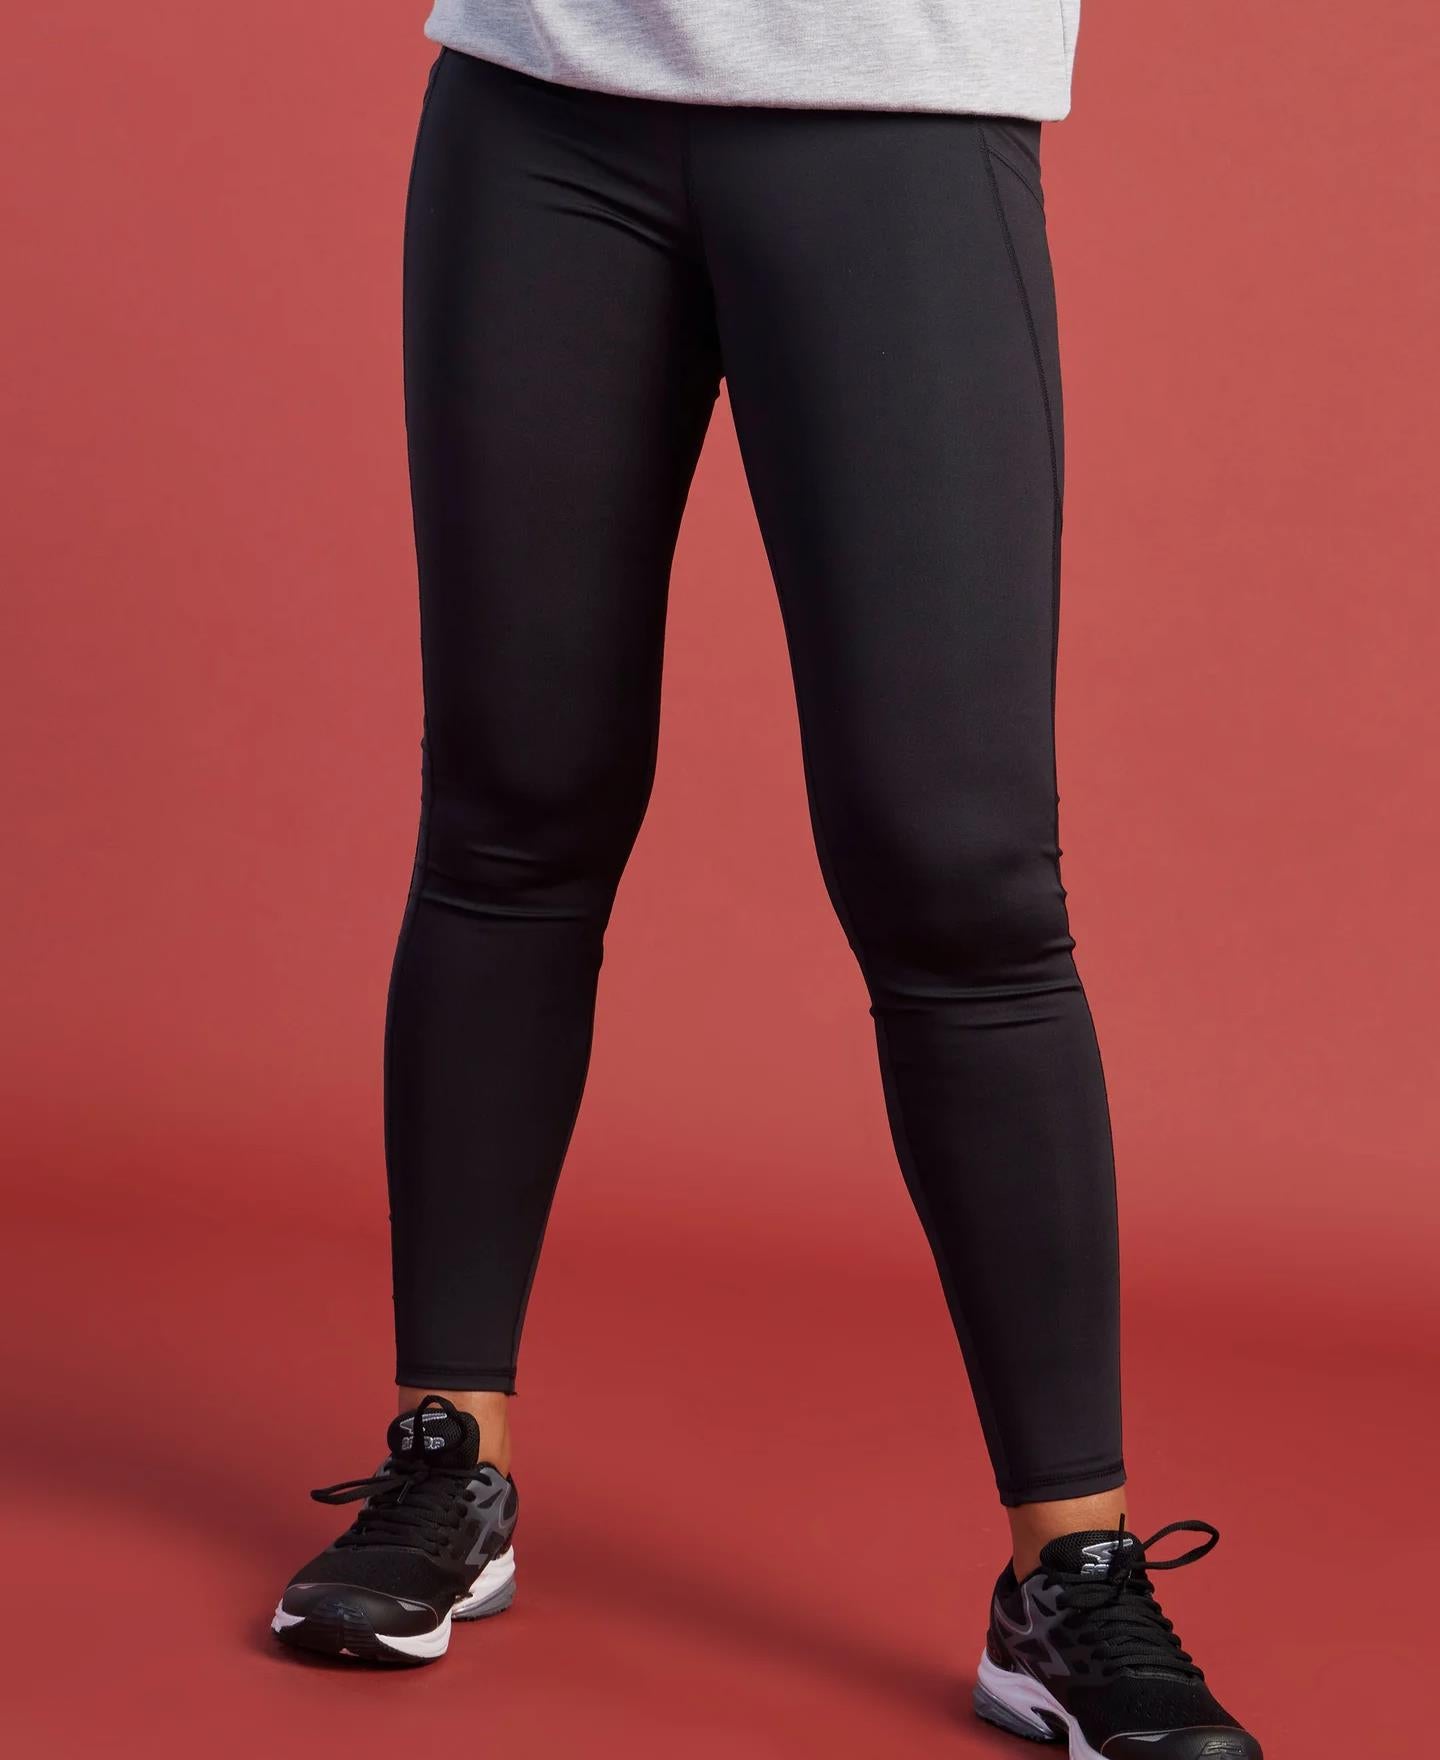 https://www.postie.co.nz/content/products/womens-elite-side-panel-pocket-legging-black-a-outfit-815880.png